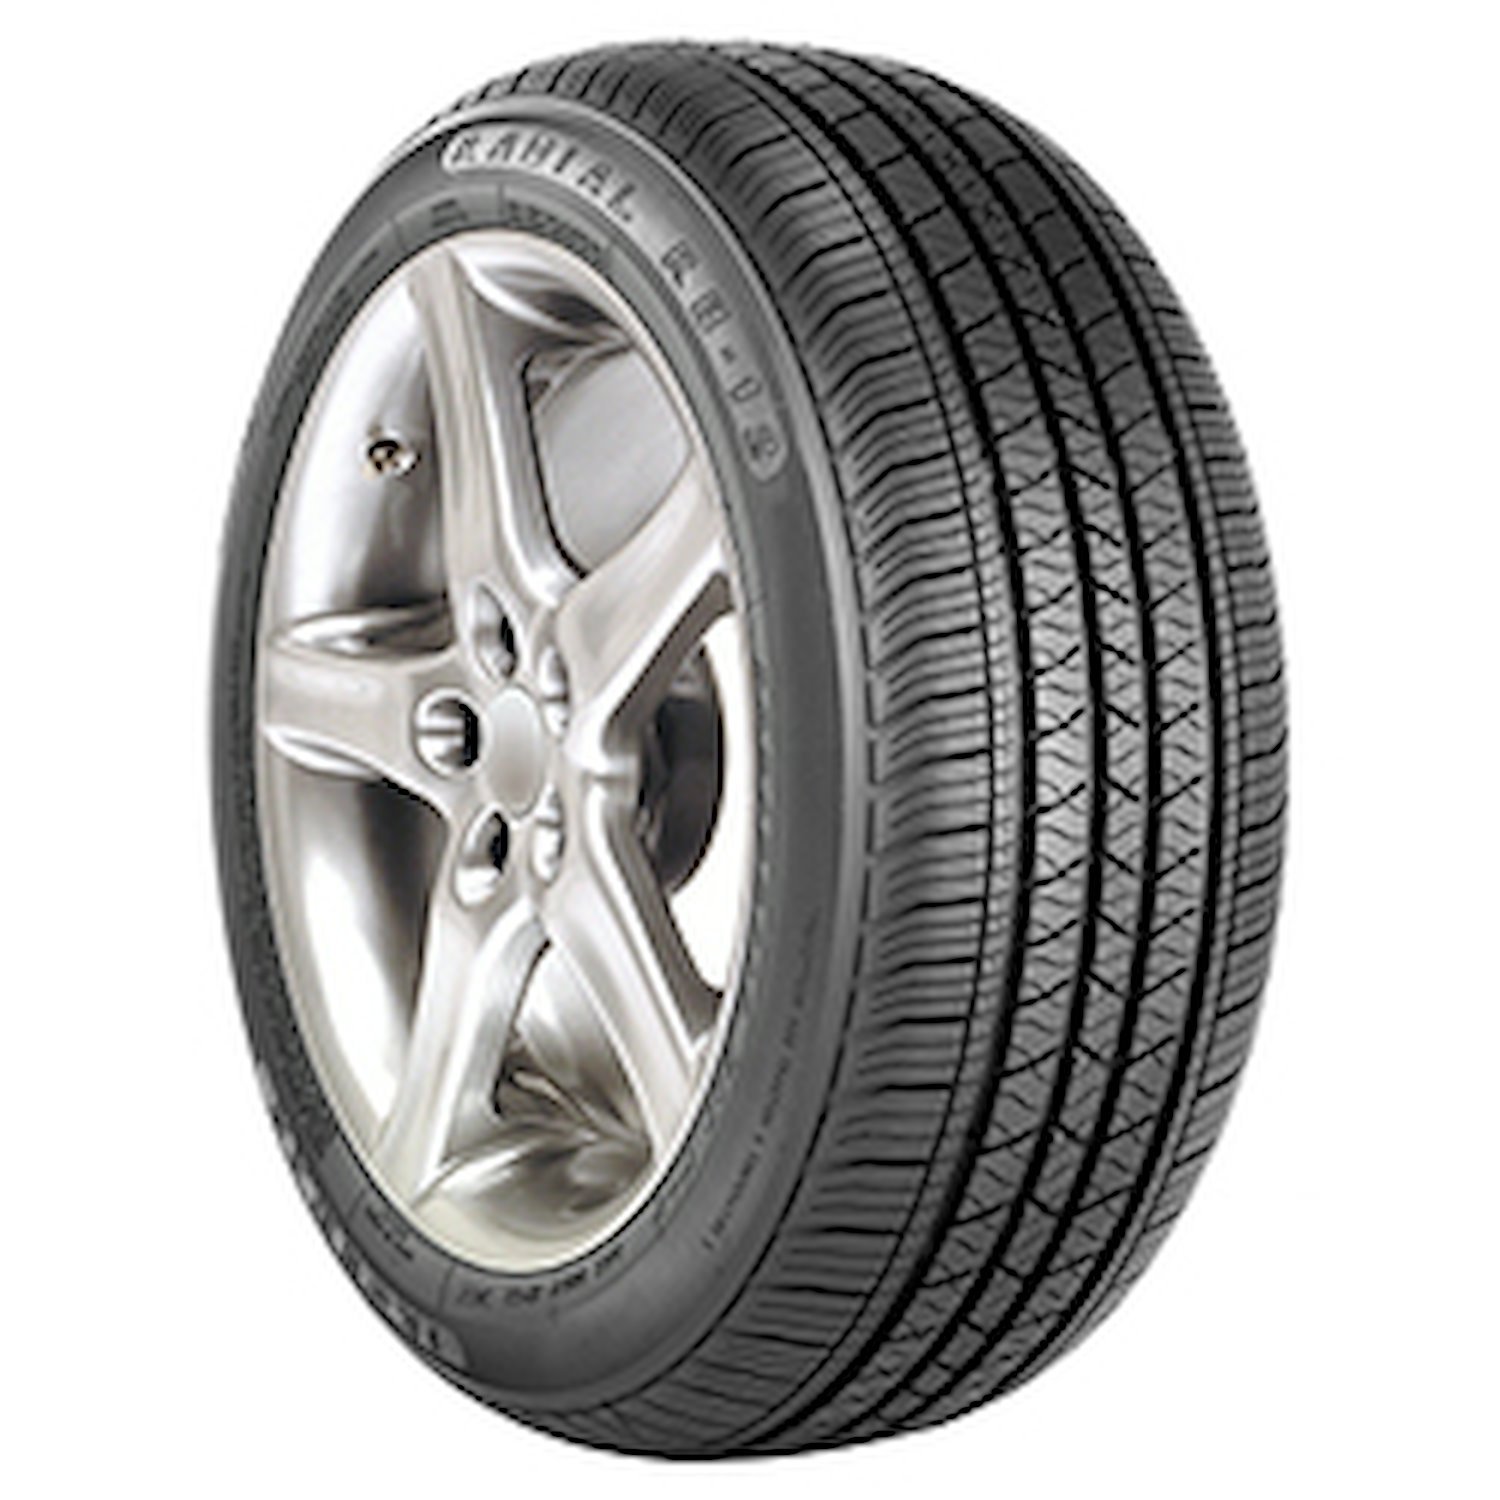 RB-12 Tire, 205/70R15 96T